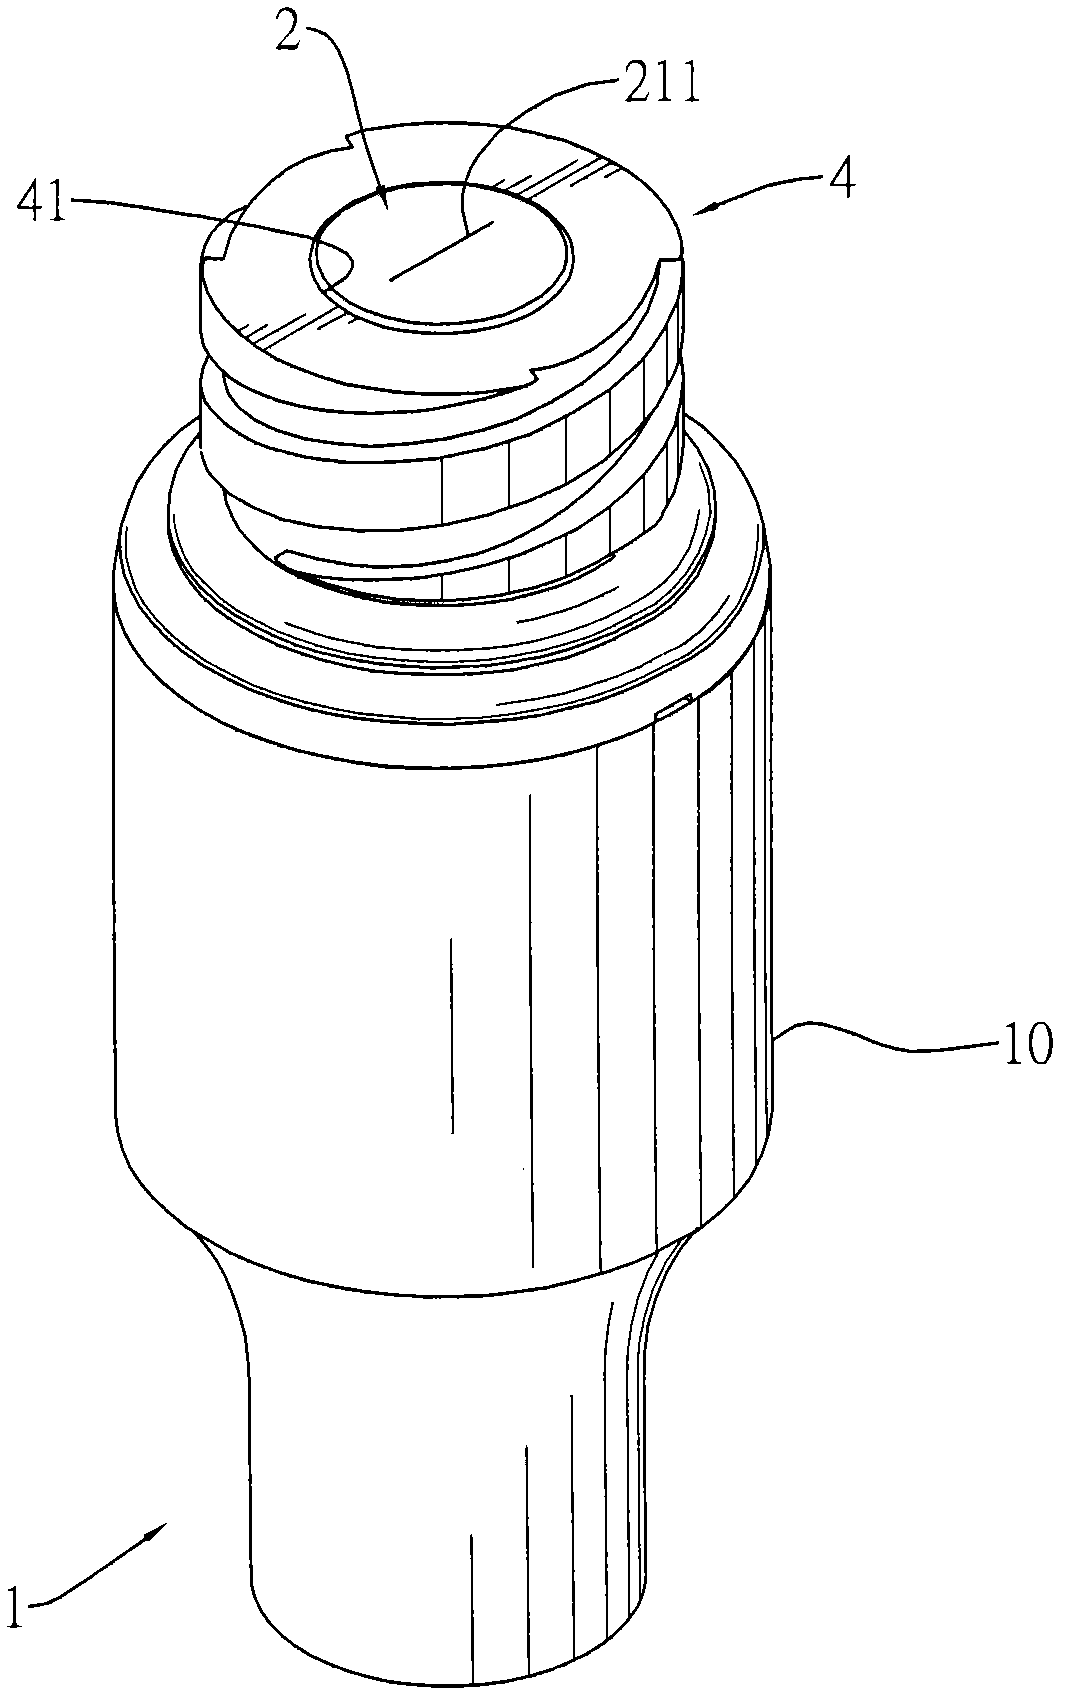 Needle-free injection connector without positive pressure and negative pressure